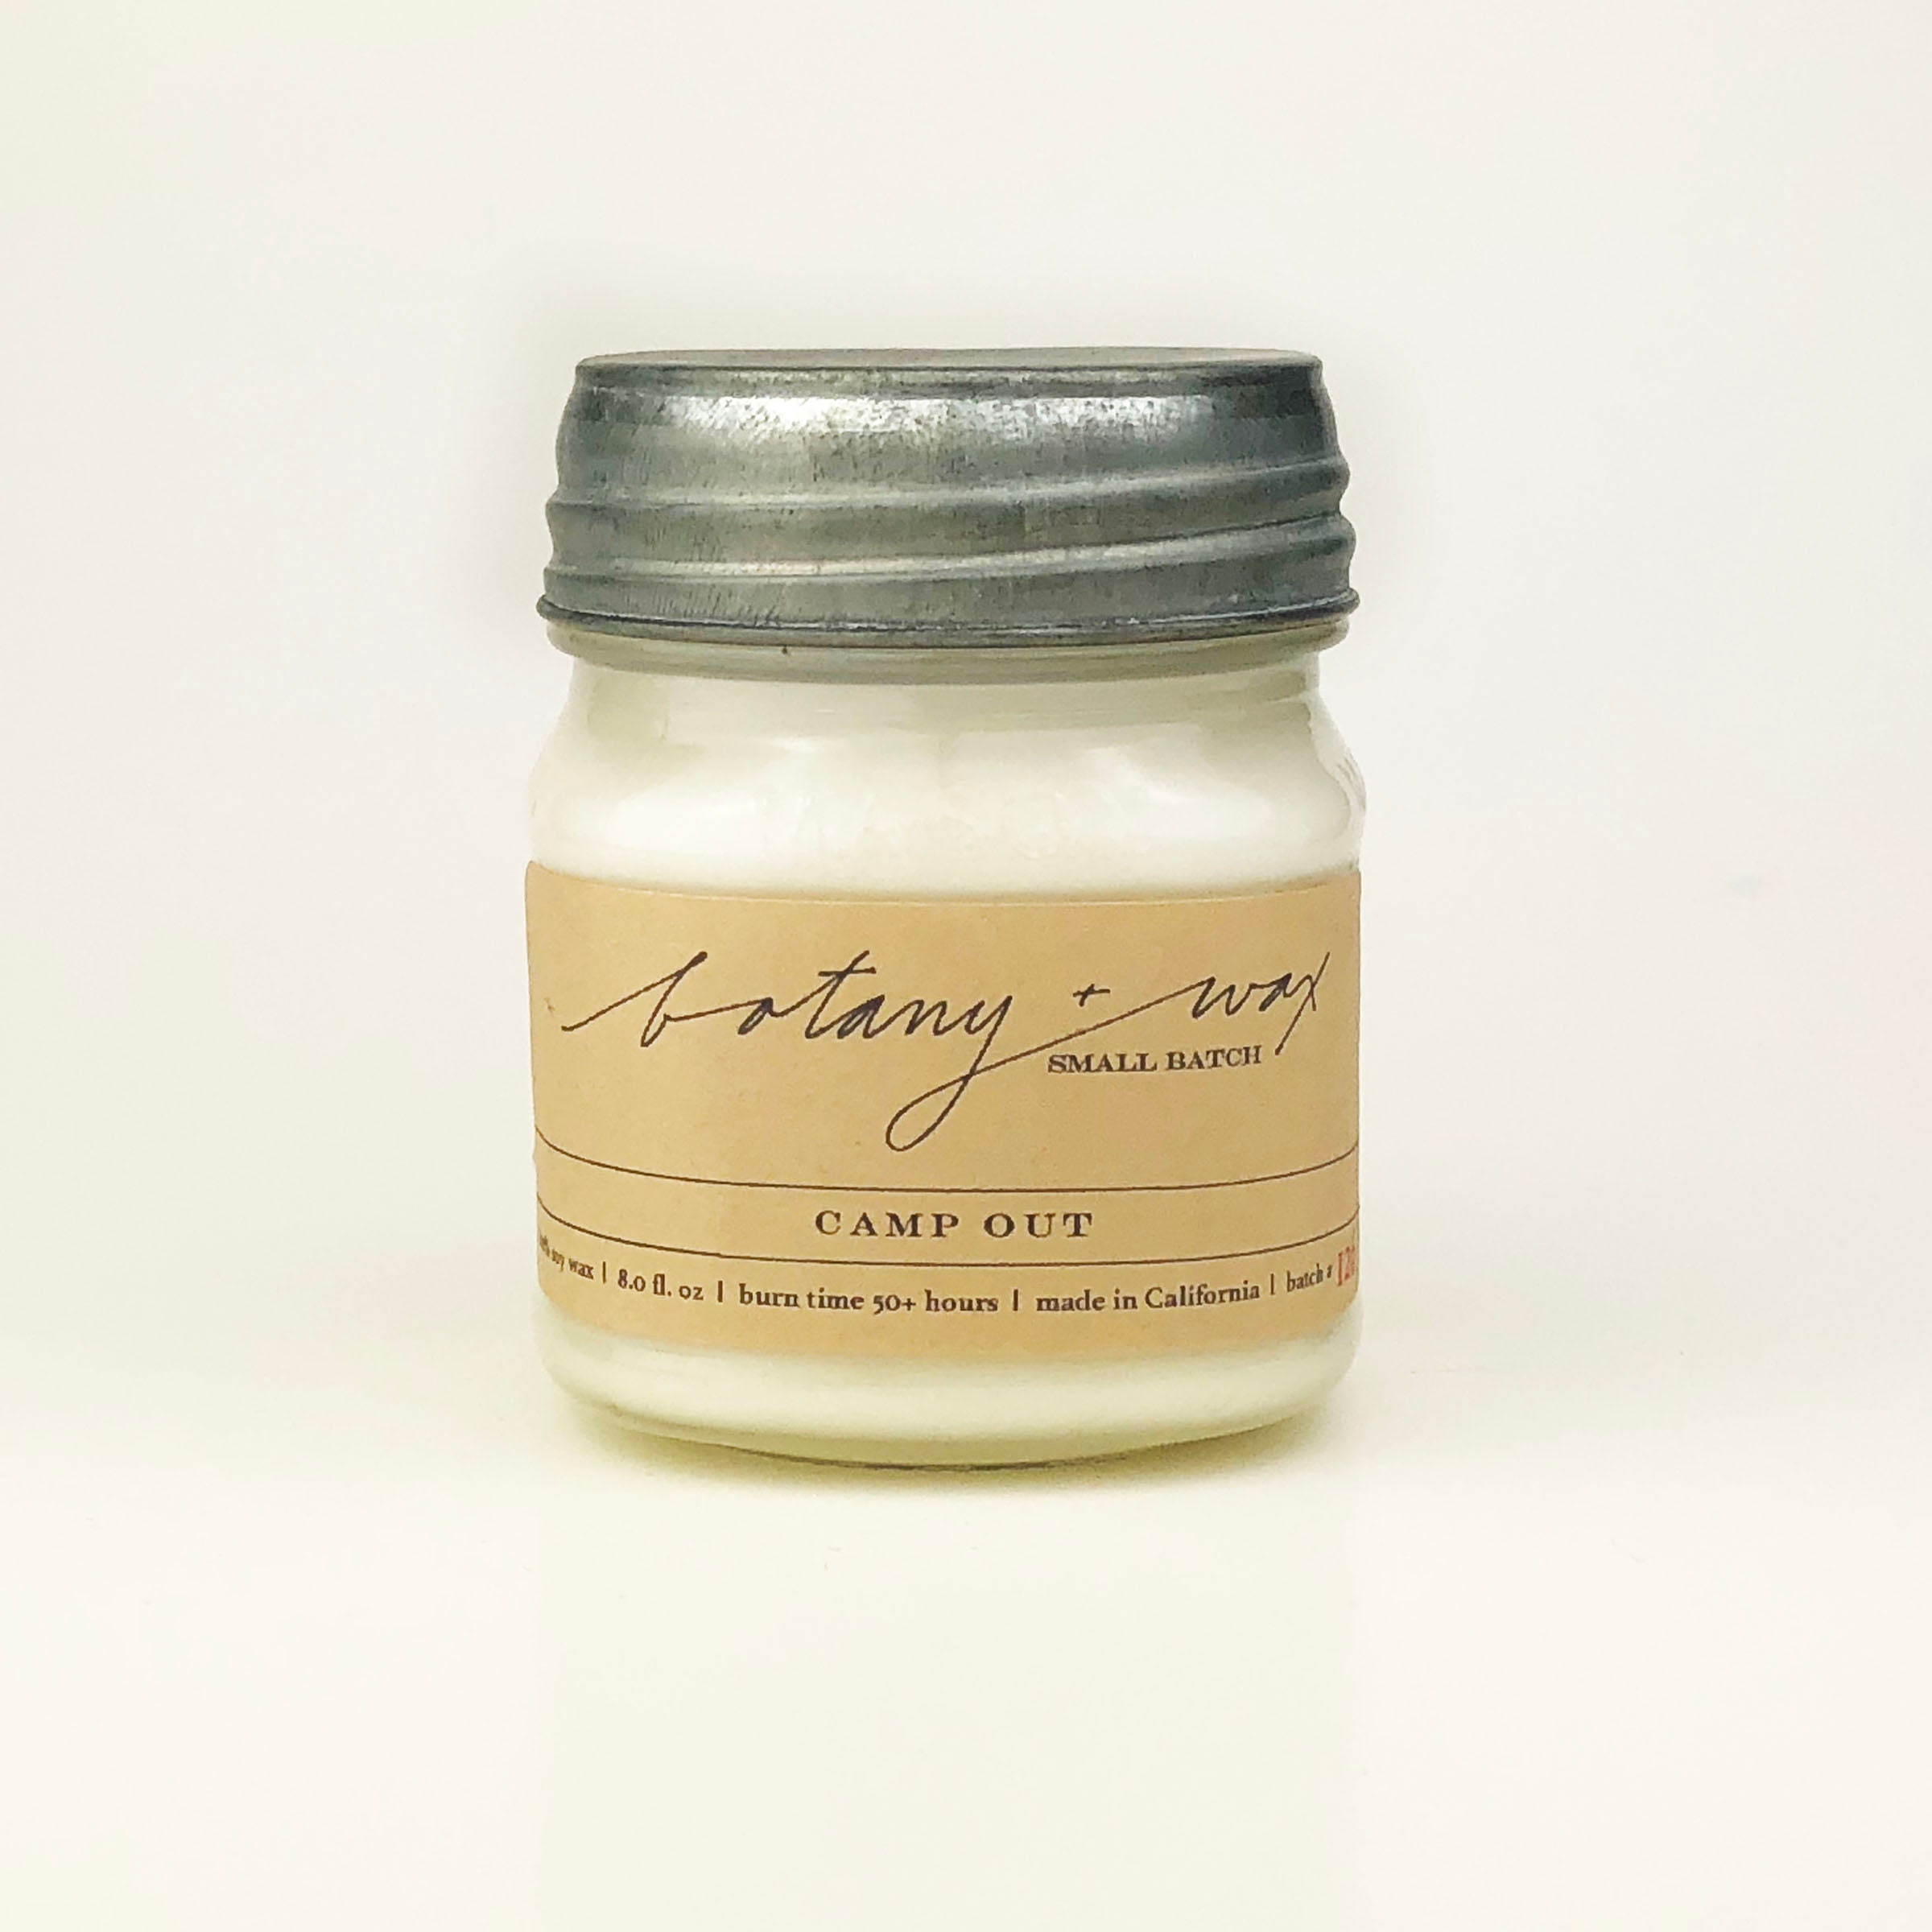 Camp Out 8oz Candle - 100% Soy / Essential Oils / Sandlewood / Clove / Bohemian